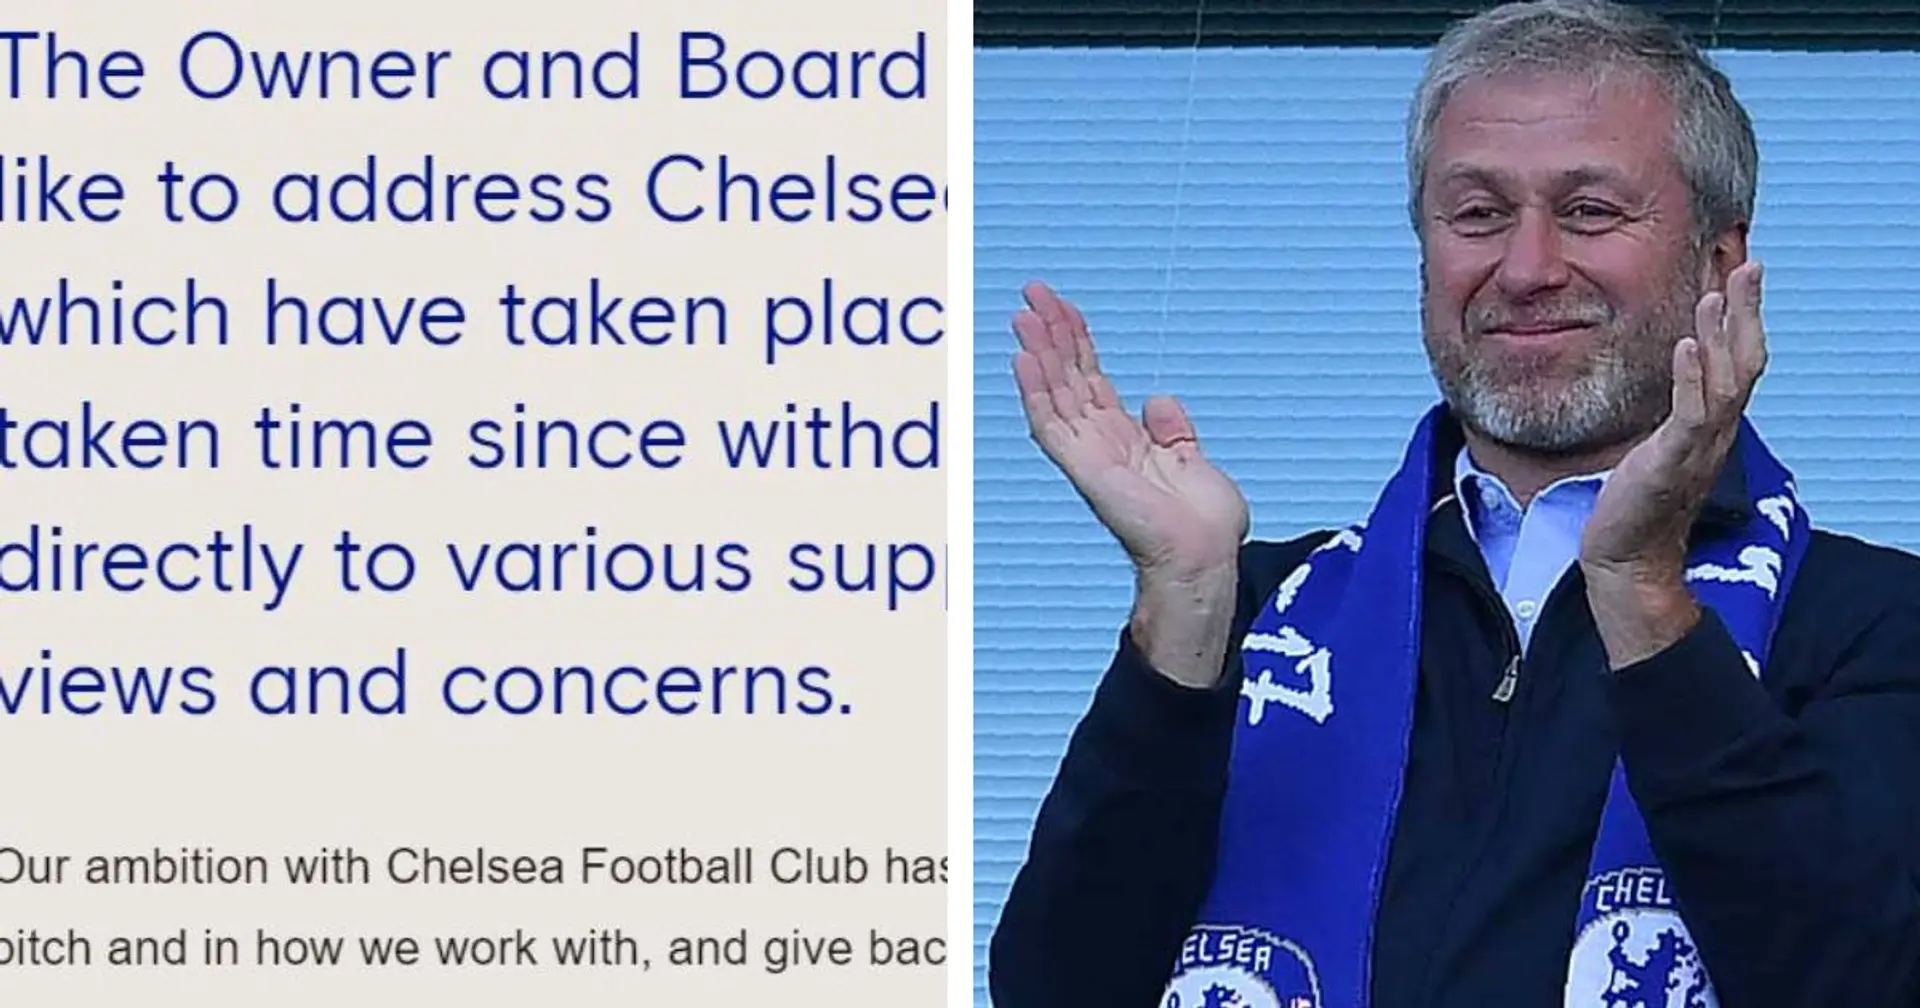 Chelsea write an open letter to supporters following Super League drama